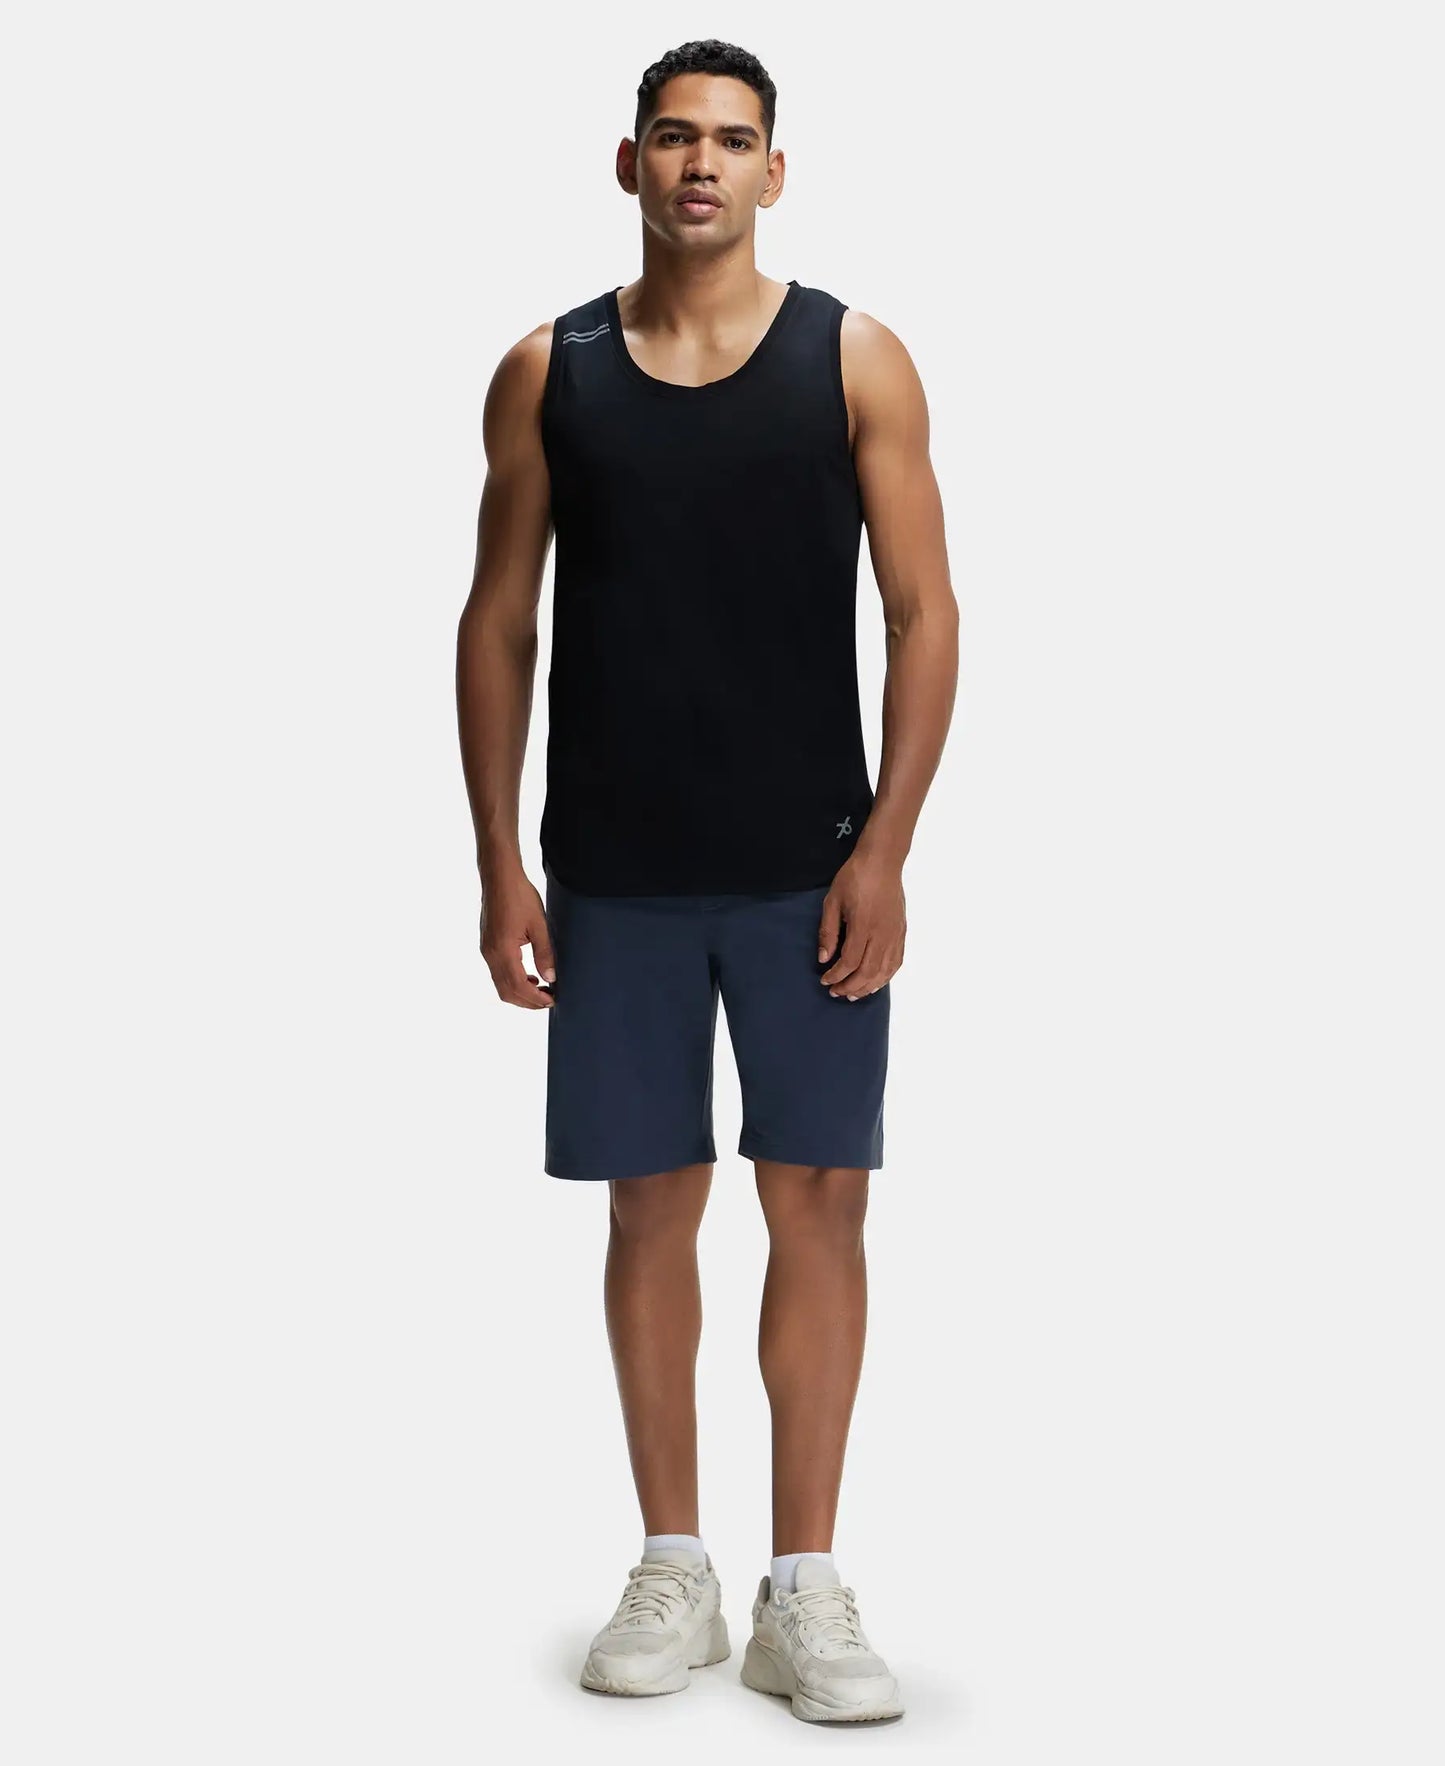 Super Combed Cotton Blend Solid Performance Tank Top with Breathable Mesh - Black-4